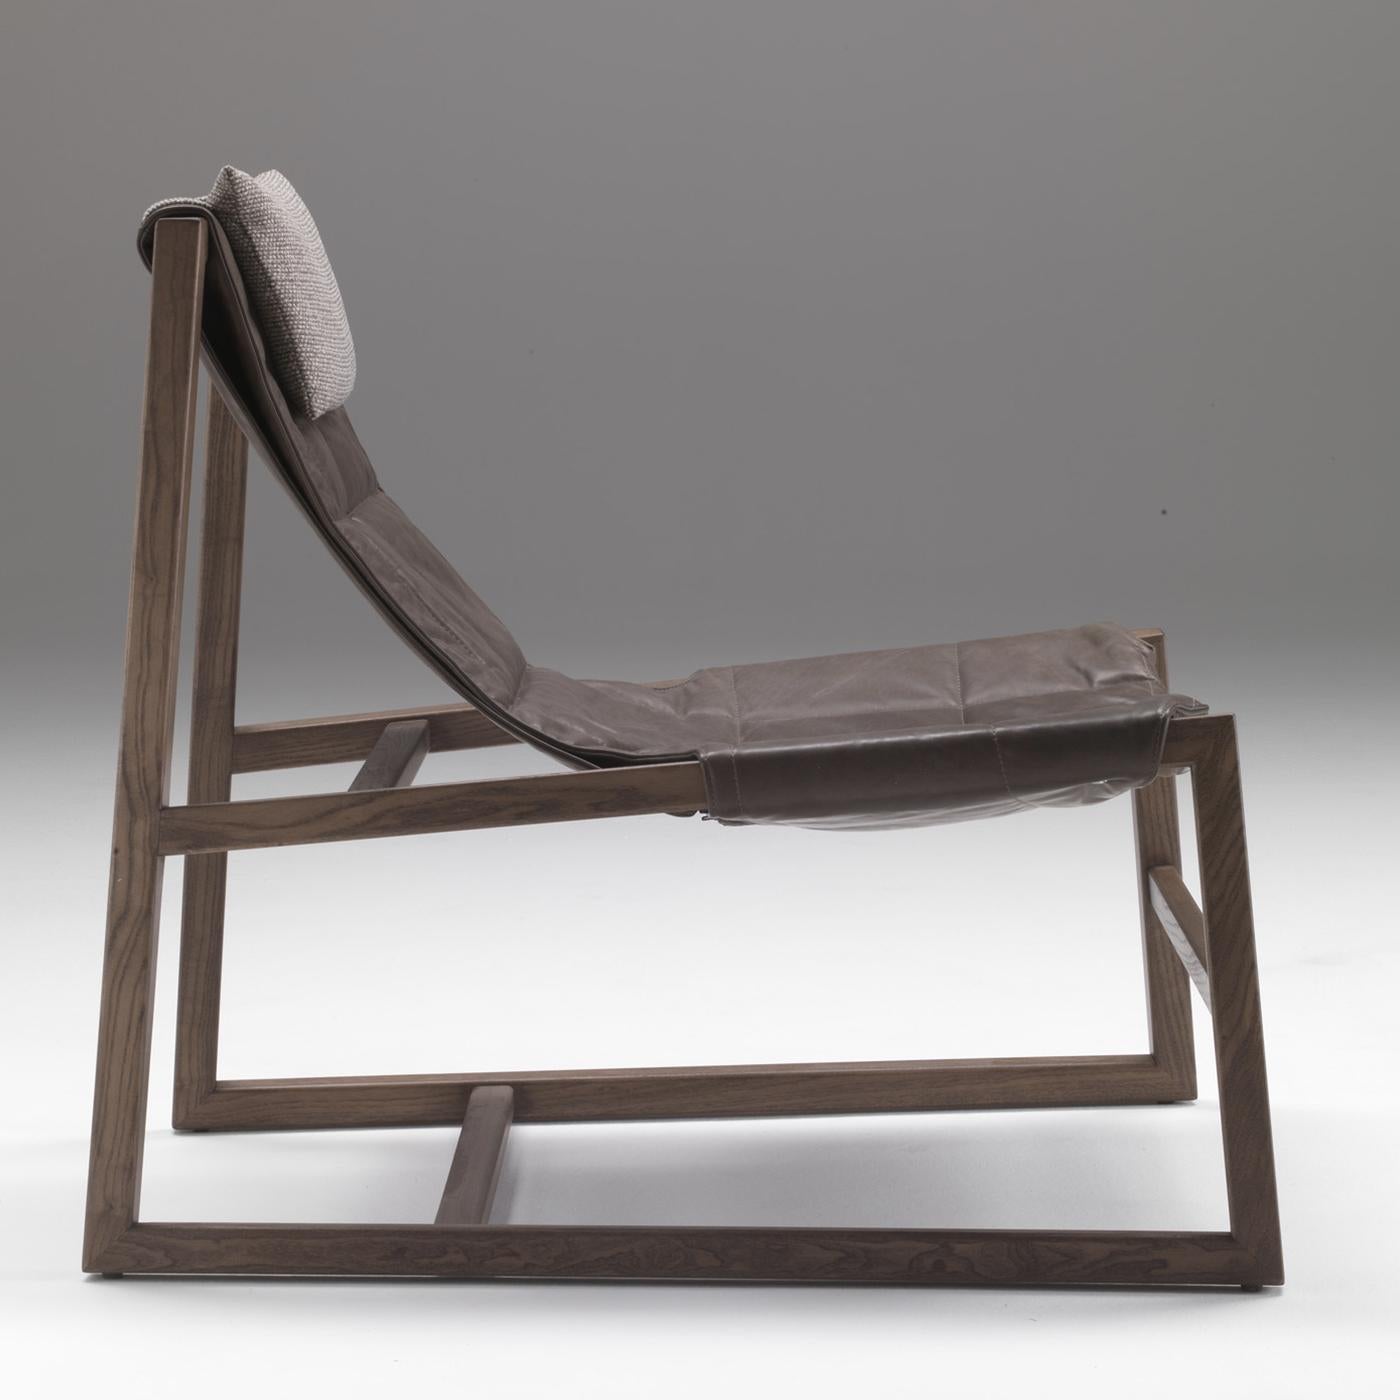 Designed by Controdesign Studio, this lounge chair boasts a bold yet elegant design that will make it stand out in any contemporary or industrial setting. Its solid ash structure combines horizontal and diagonal elements that supports a brown